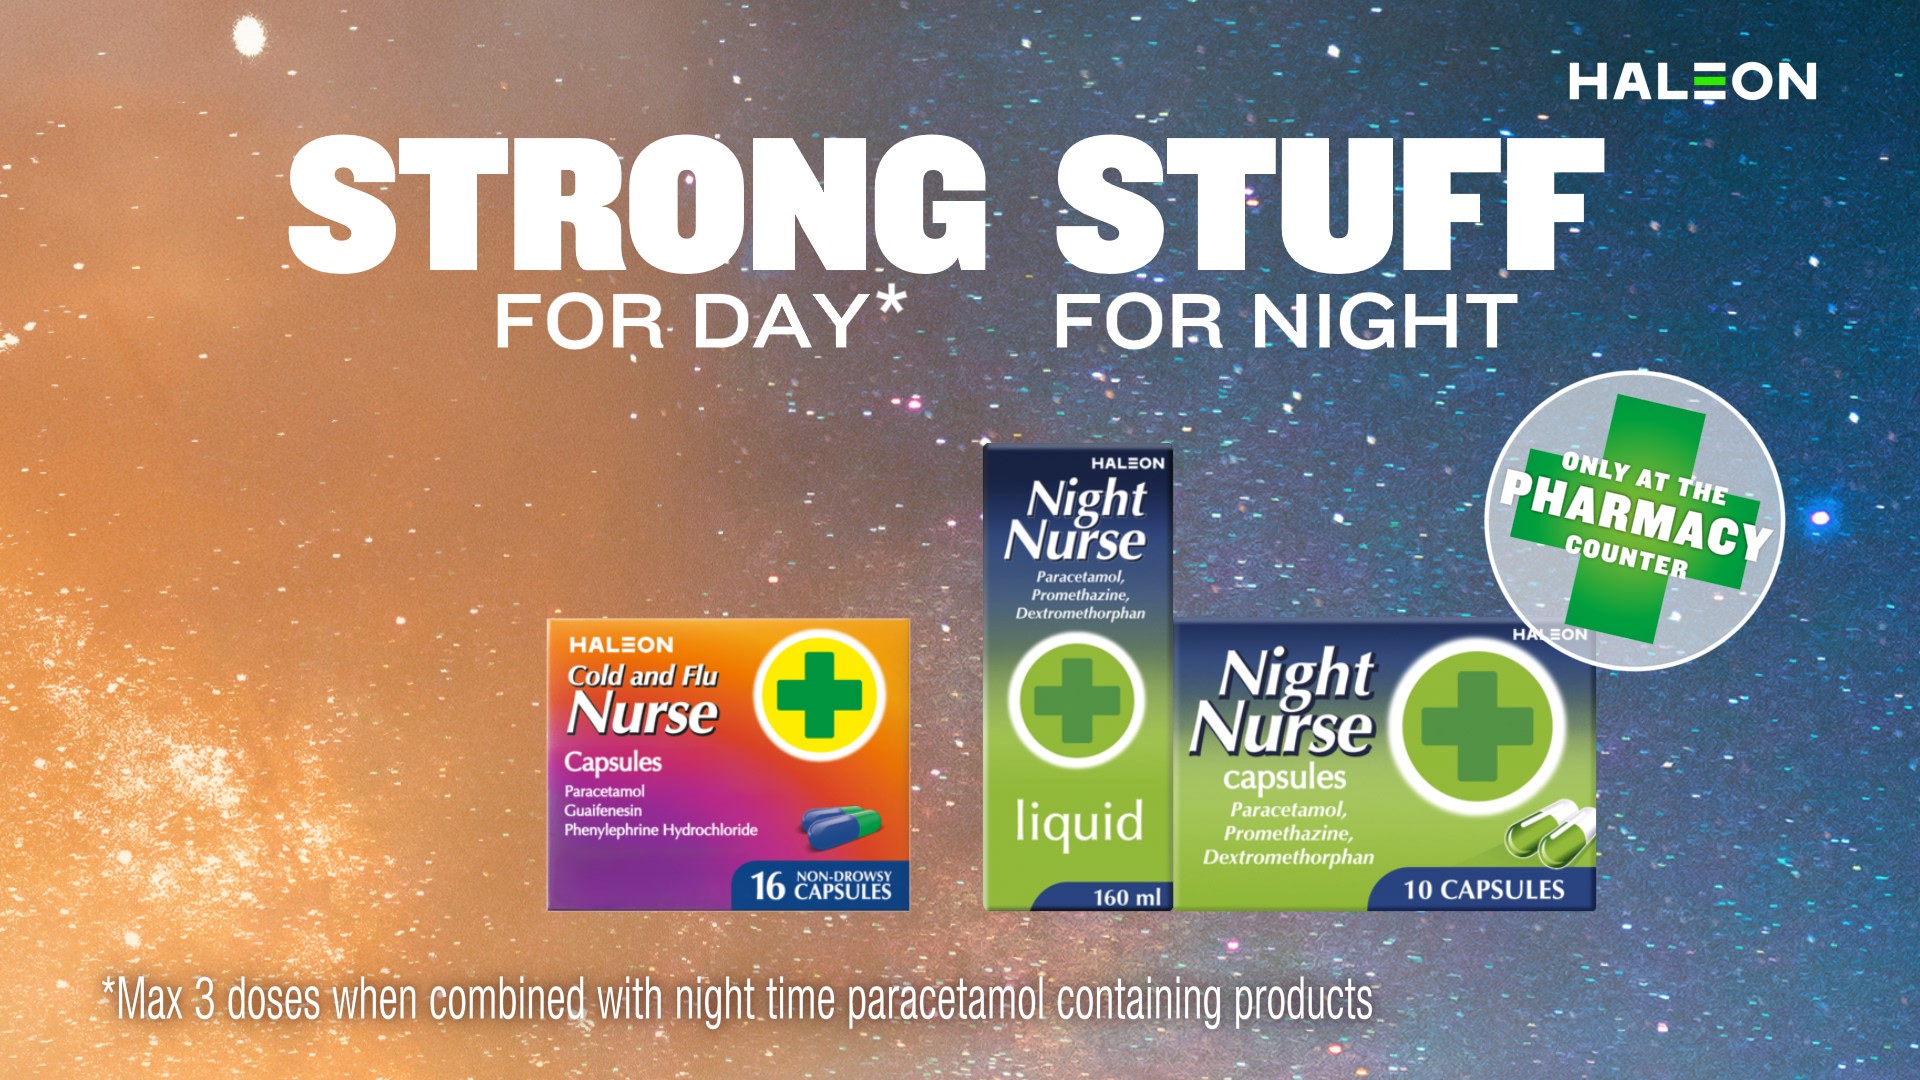 Nothing is stronger for cold & flu - day and night